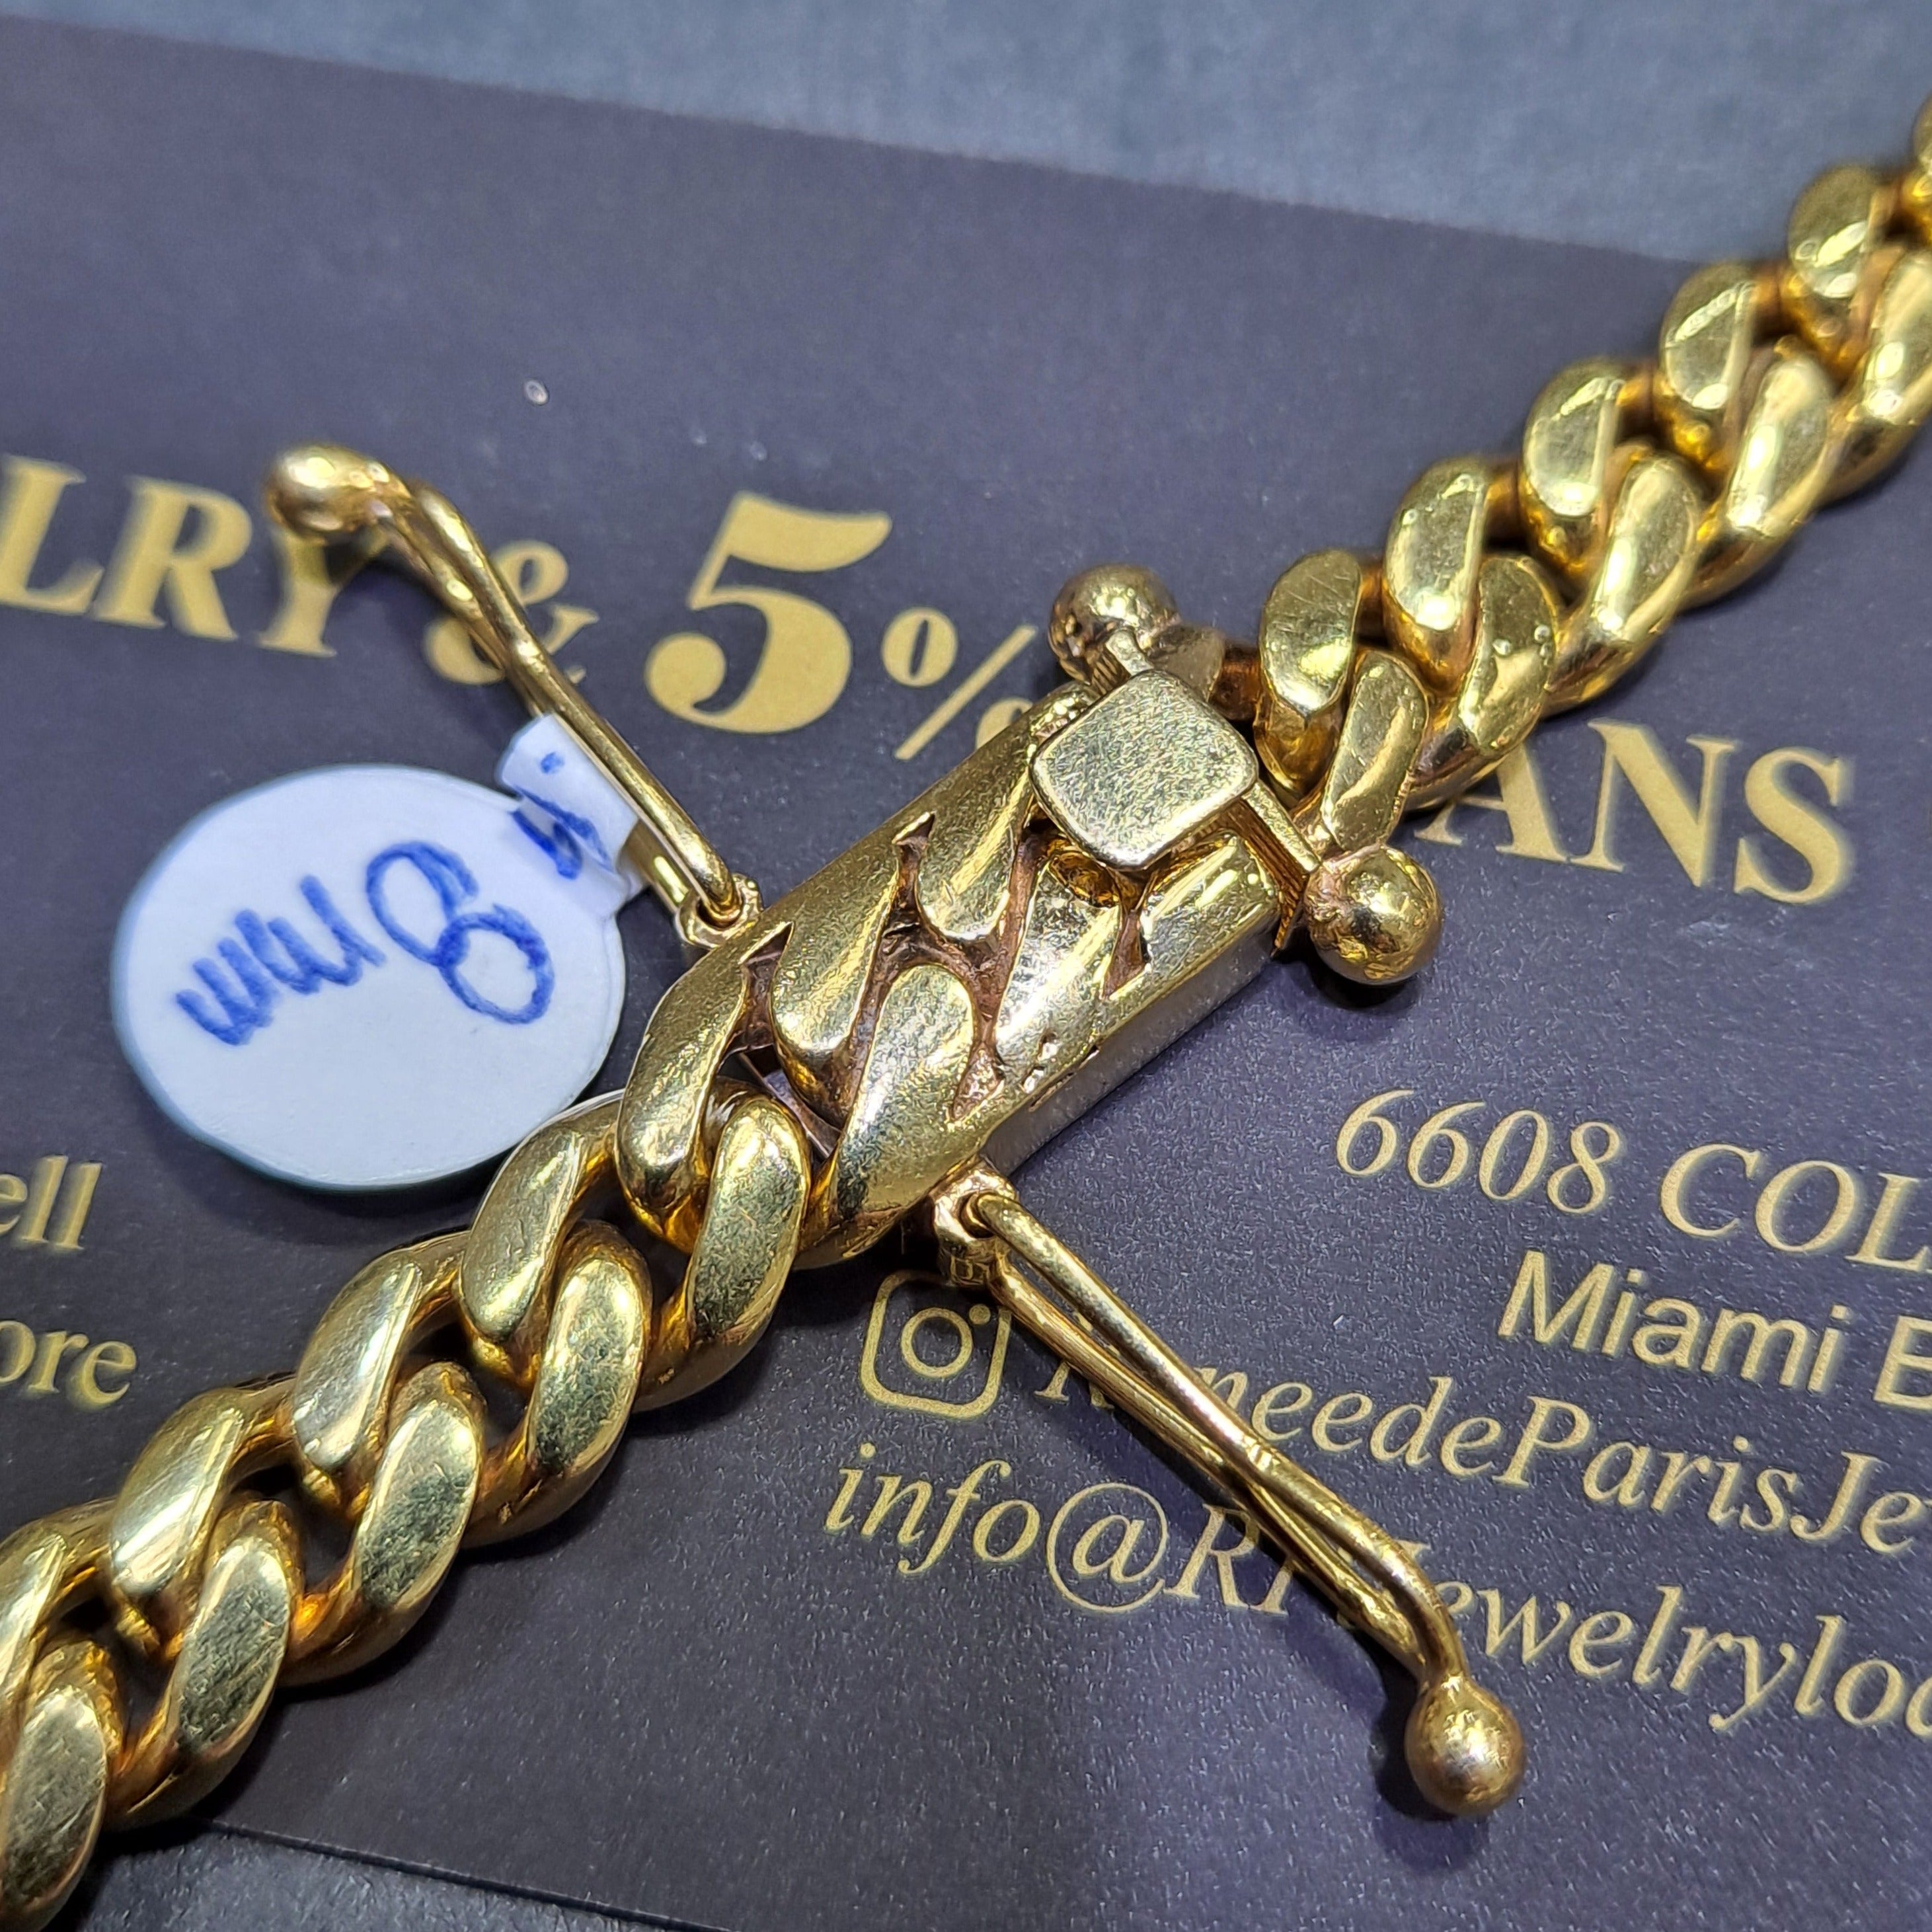 new 10k miami cuban link 8mm,116 grams ,26inches